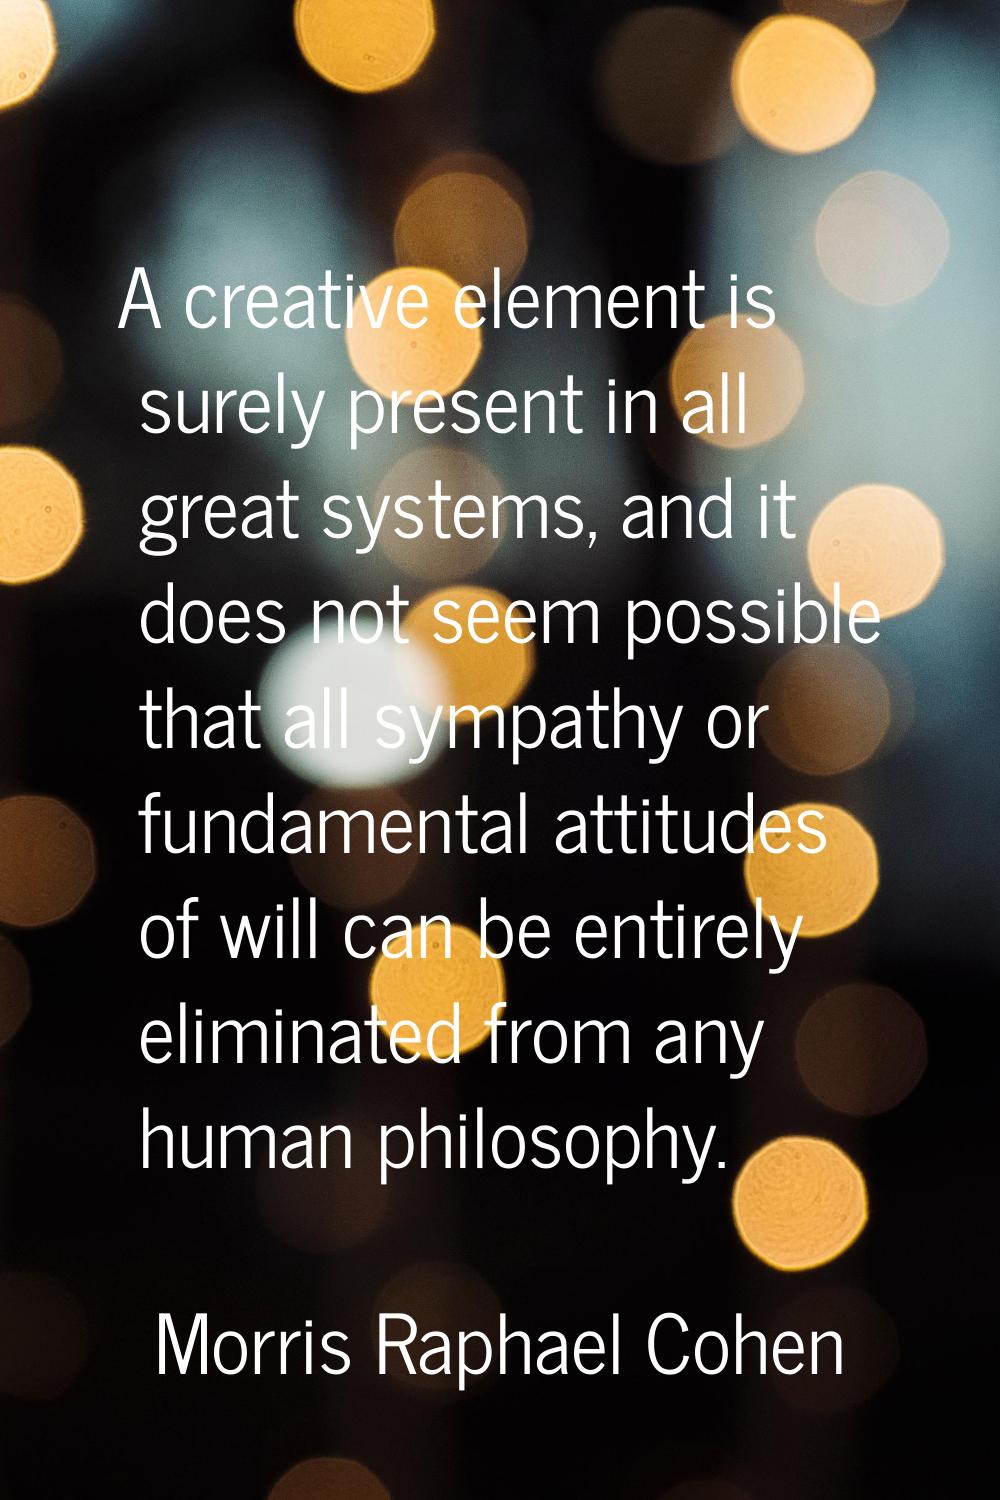 A creative element is surely present in all great systems, and it does not seem possible that all s